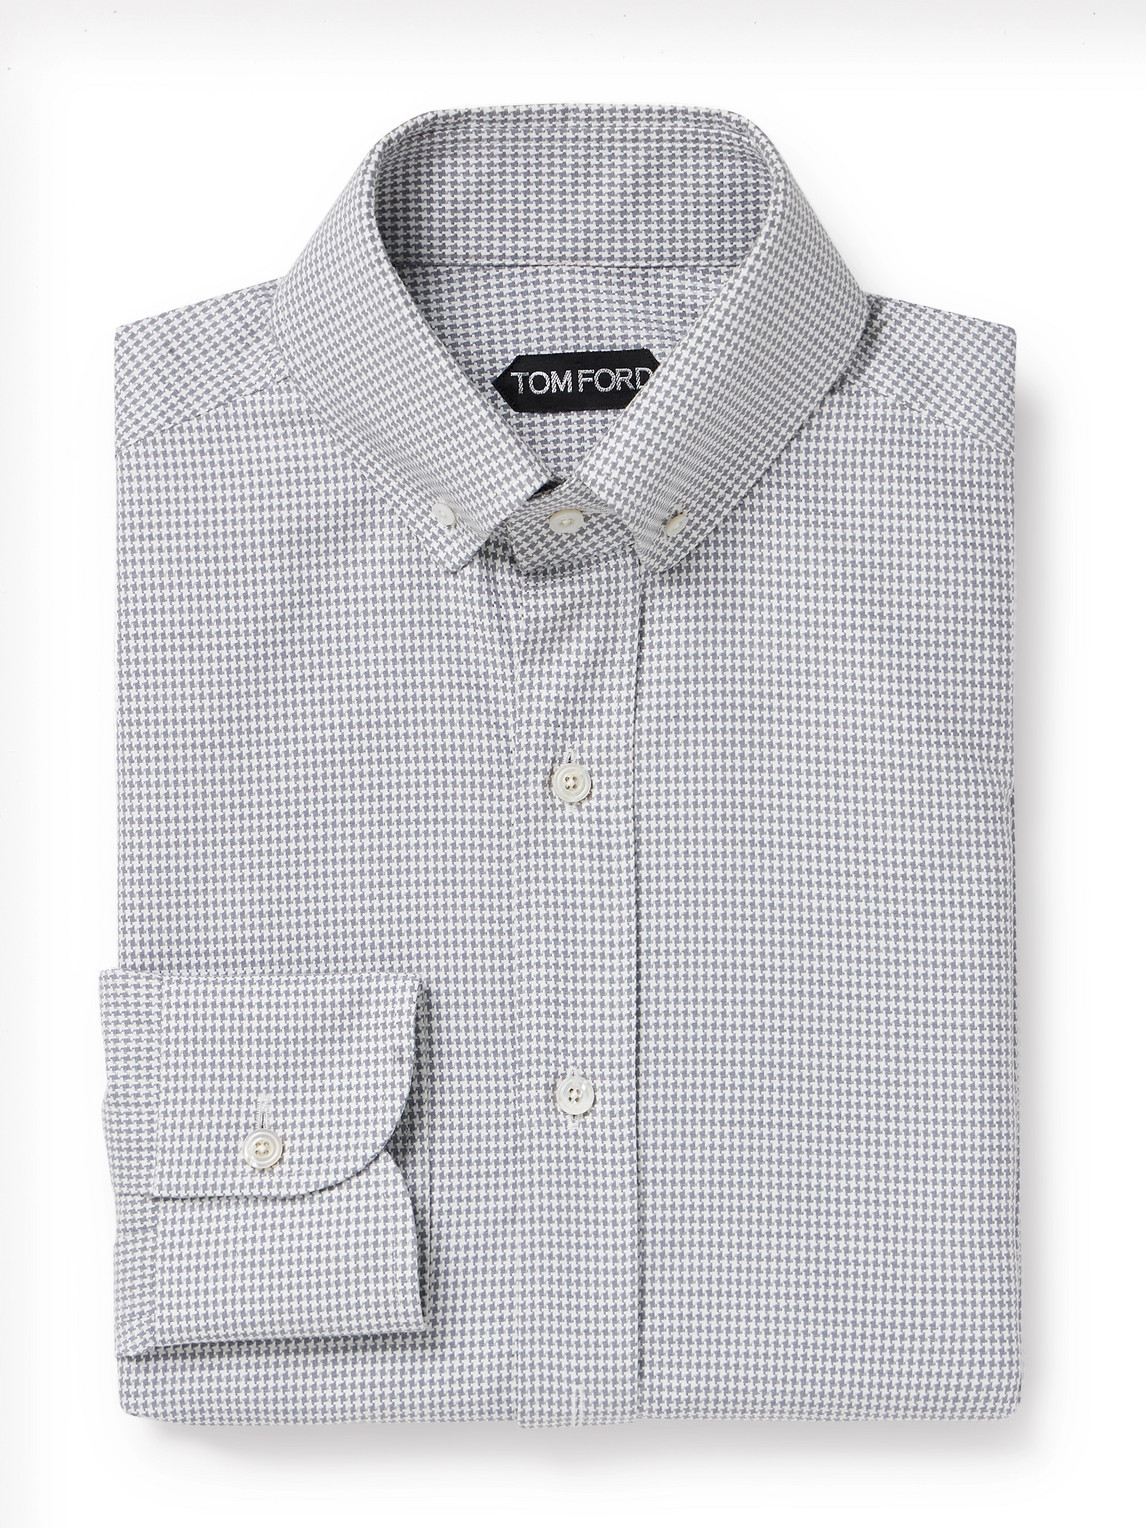 TOM FORD - Slim-Fit Button-Down Collar Puppytooth Cotton and Lyocell-Blend Shirt - Men - Gray - EU 42 von TOM FORD